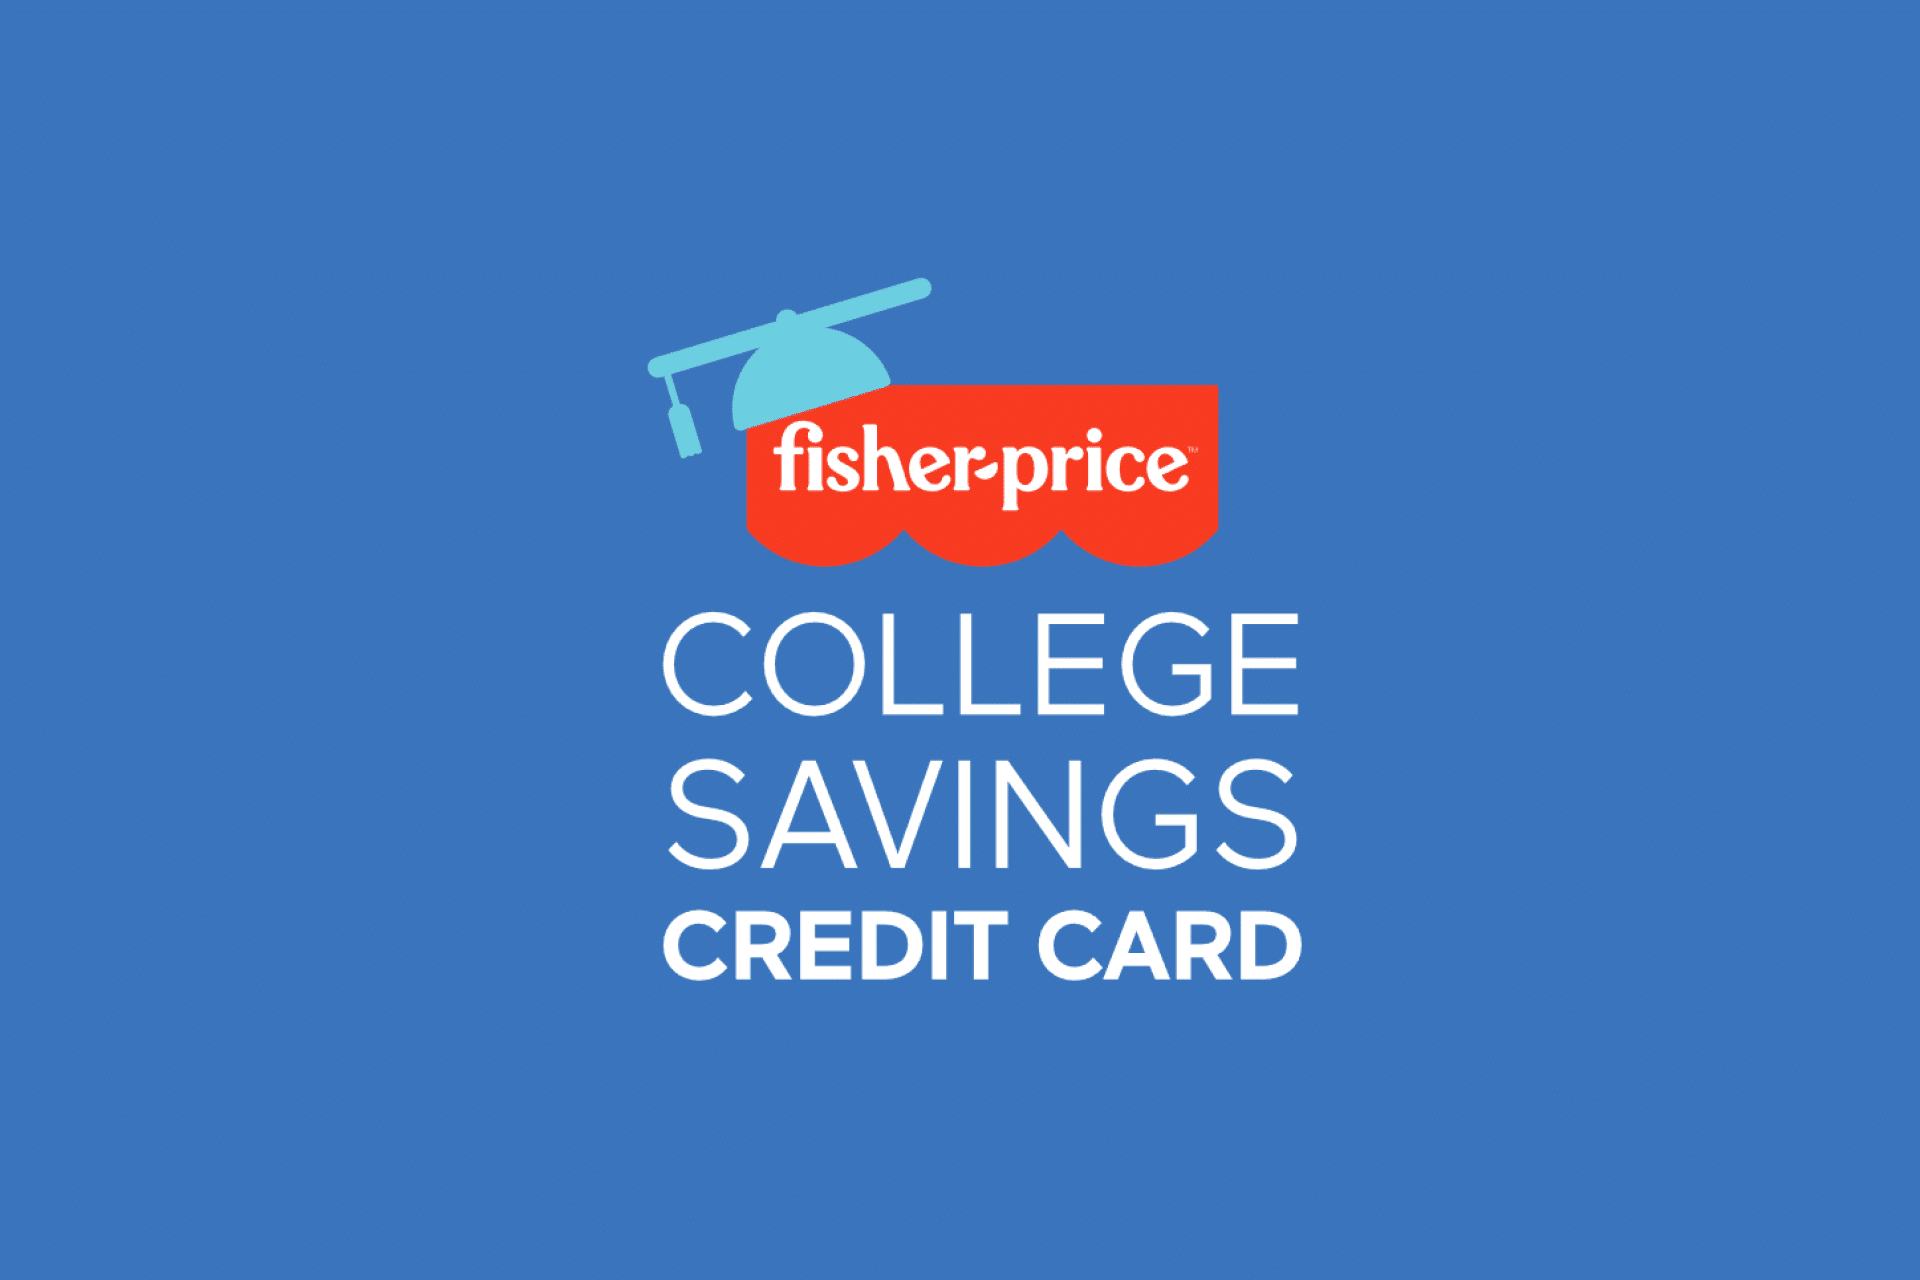 Fischer Price credit cards lets you earn rewards to apply to a 529 college savings plan